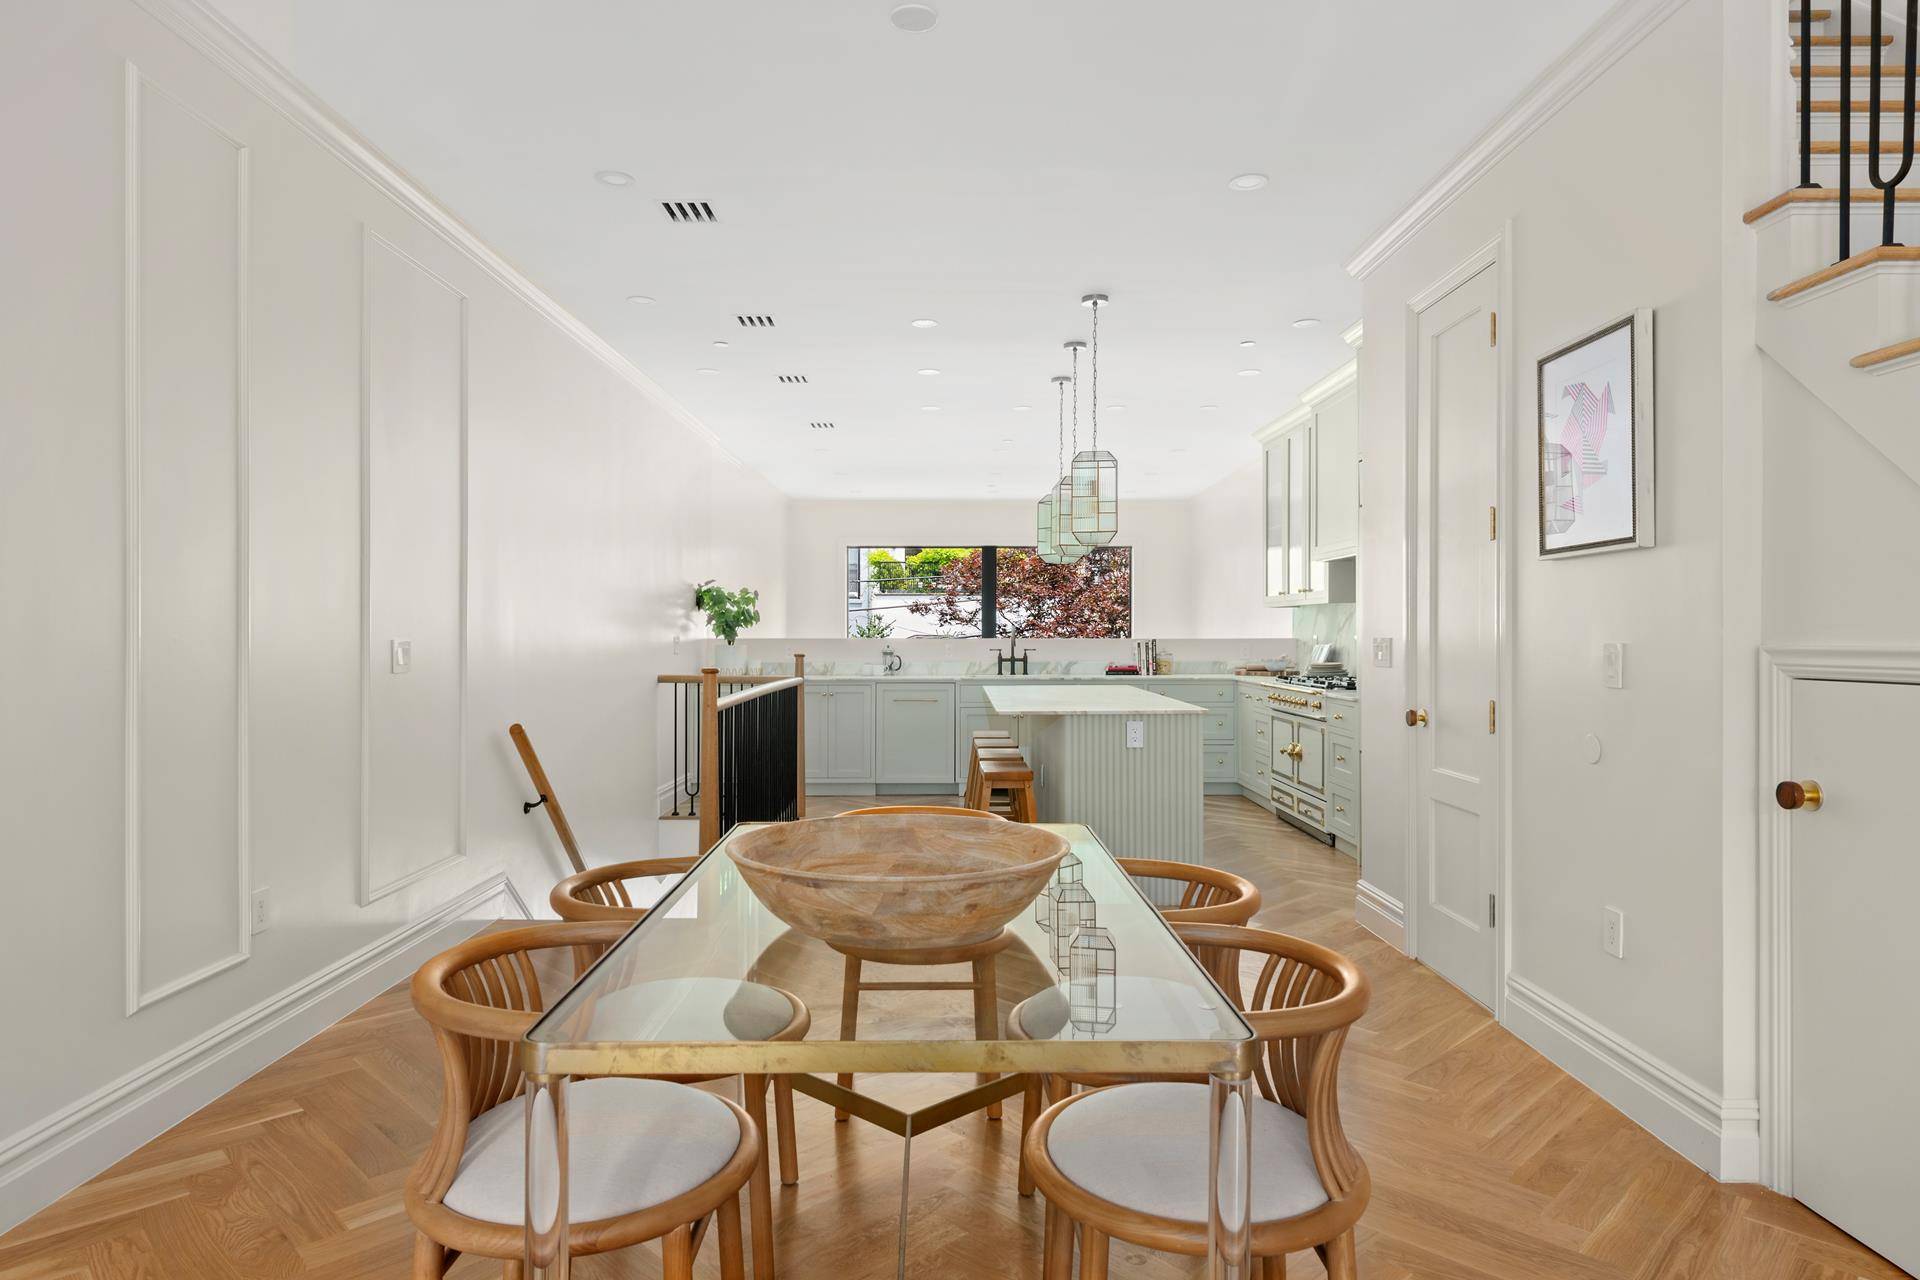 Located on one of Park Slope's most desirable centrally located blocks, 439 5th Street is a turnkey design masterpiece.